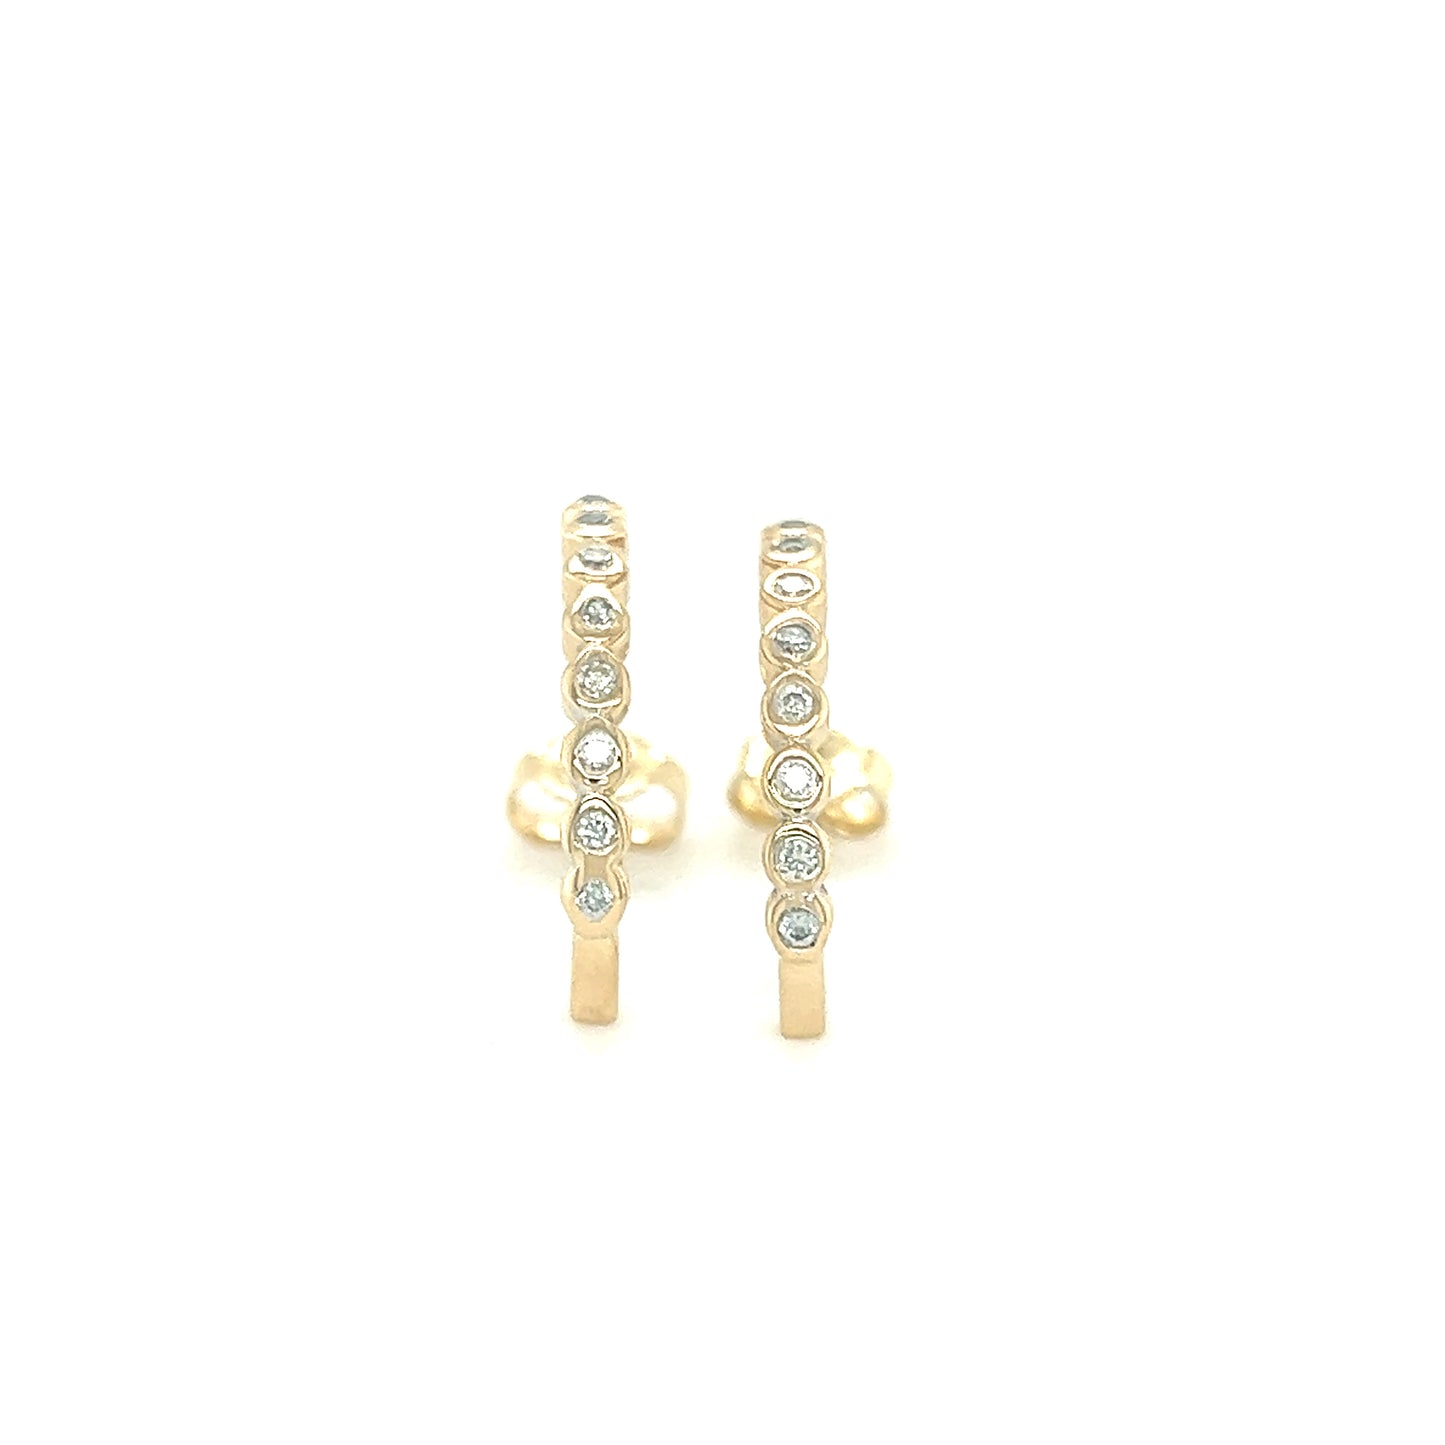 J-Hoop Earrings with Sixteen Diamonds in 14K Yellow Gold Front View